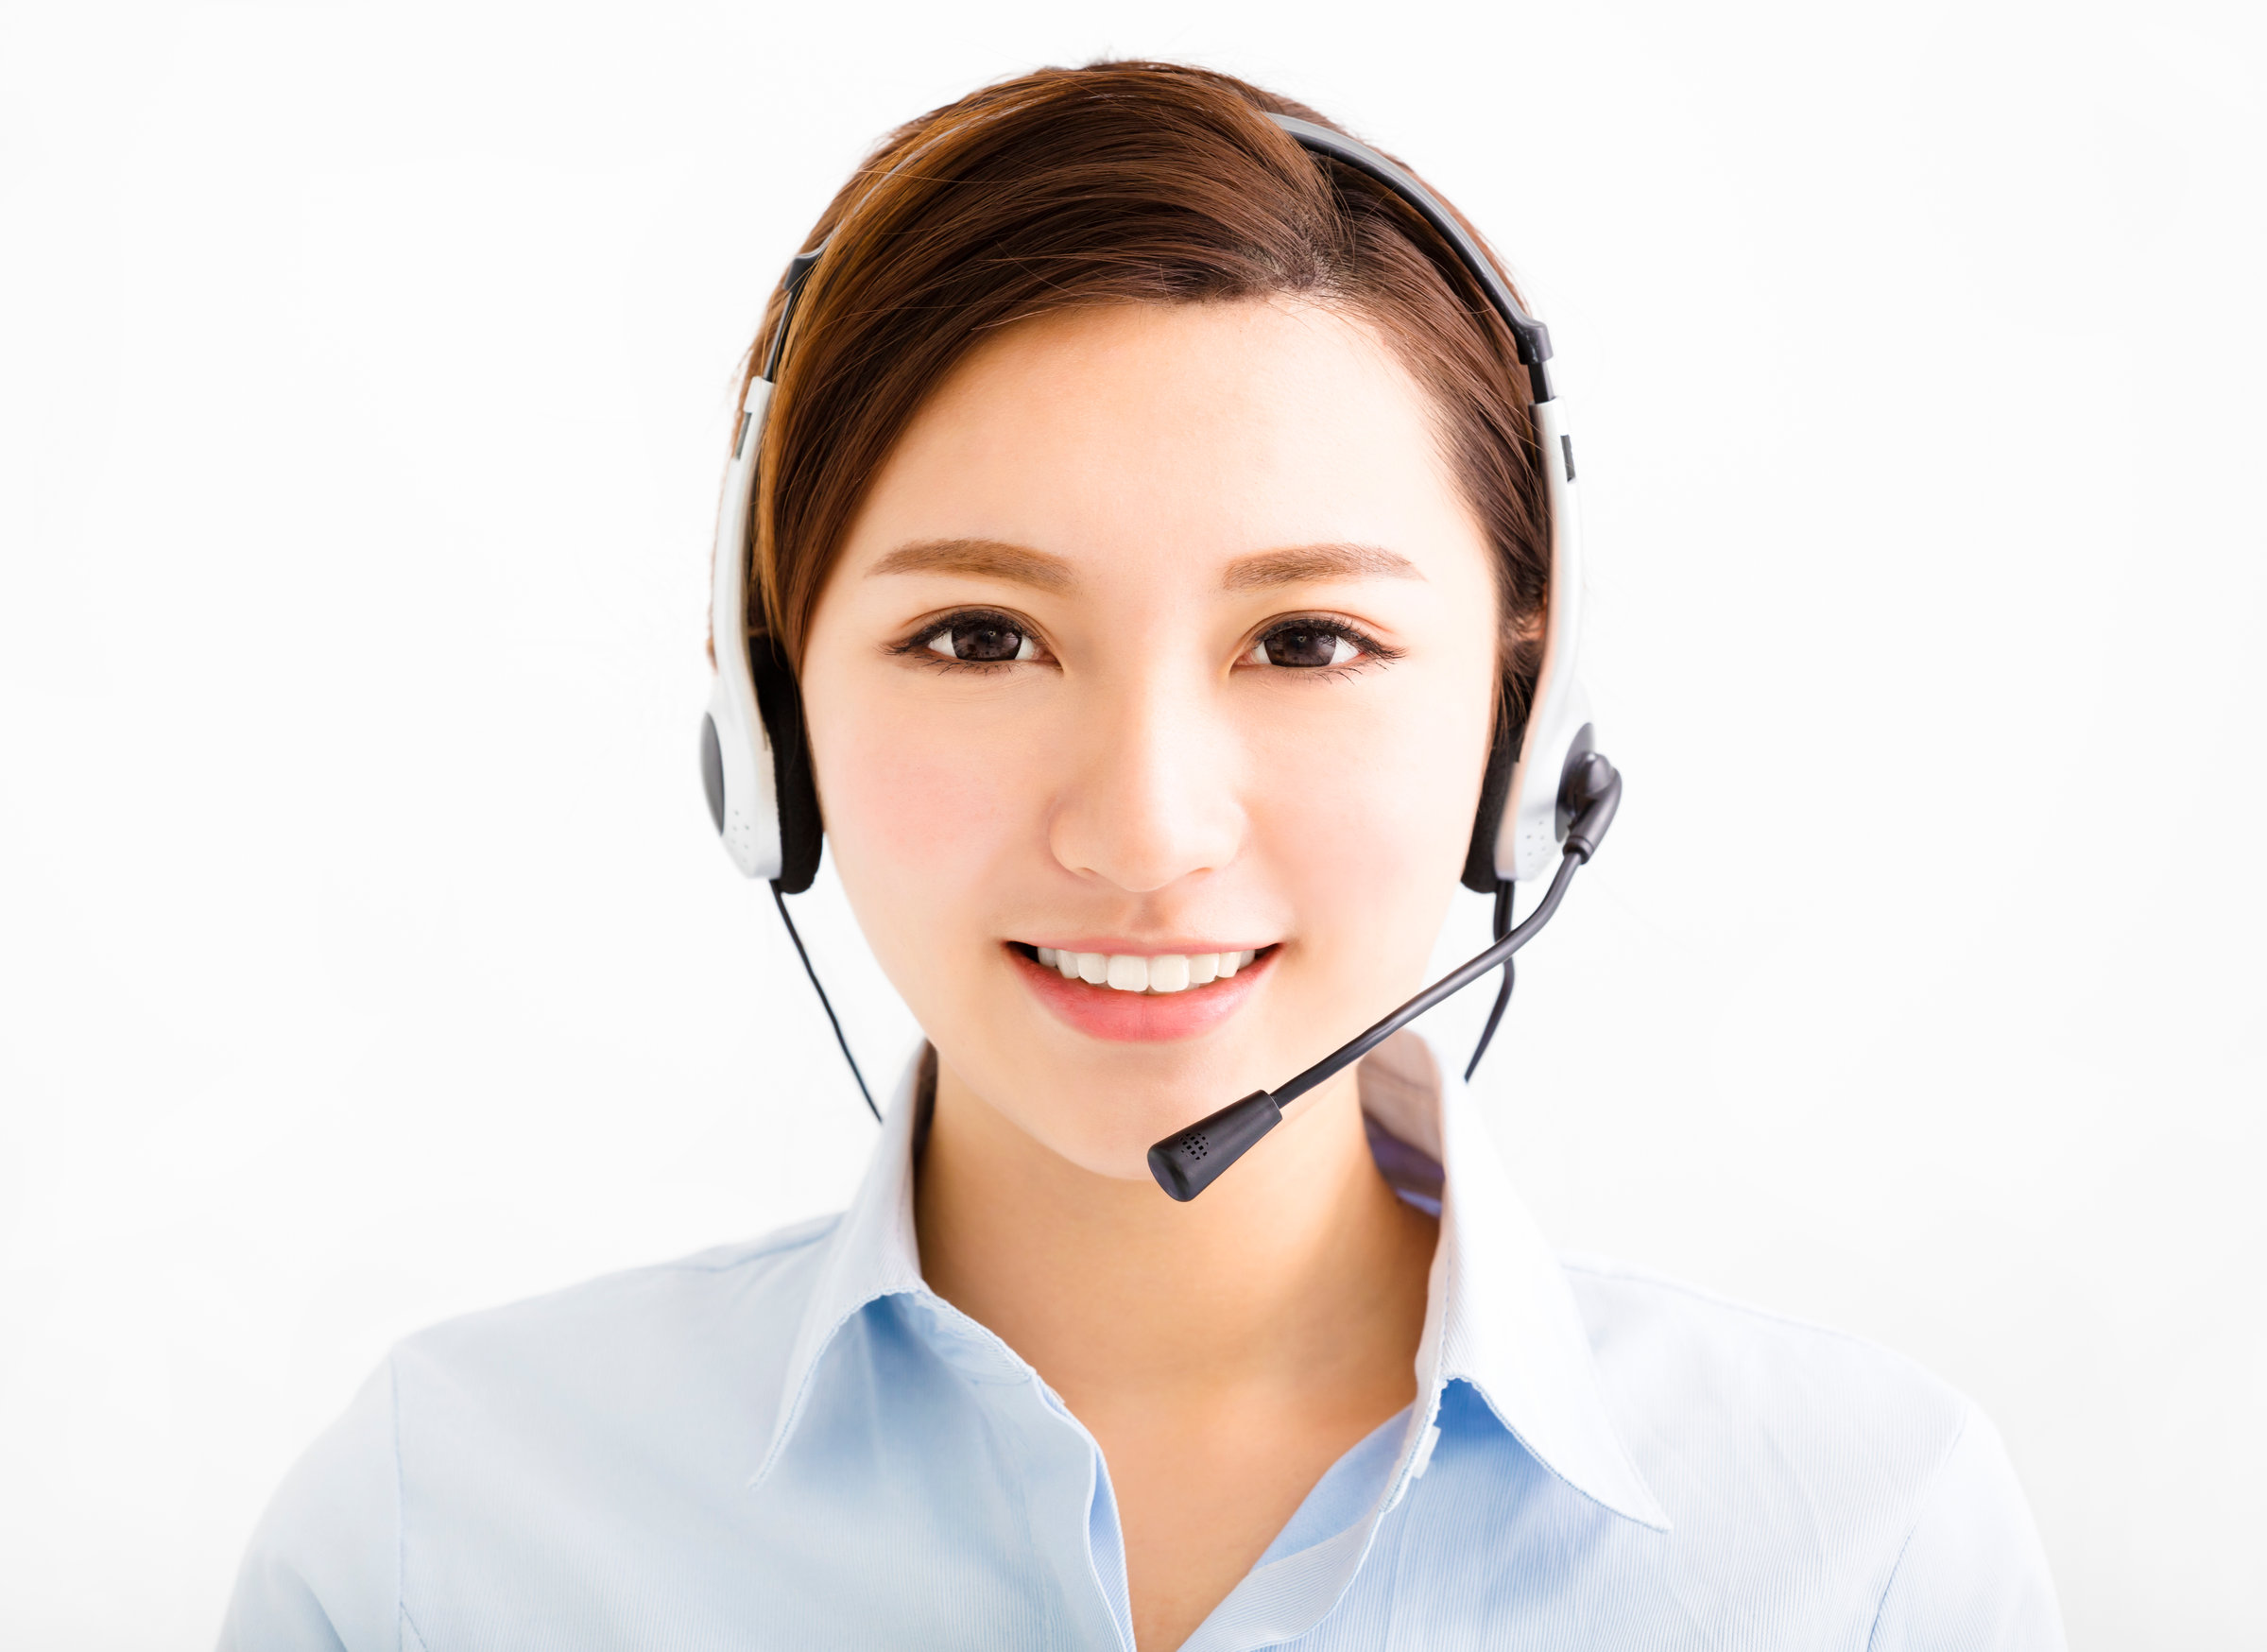 Smiling agent business woman with headsets